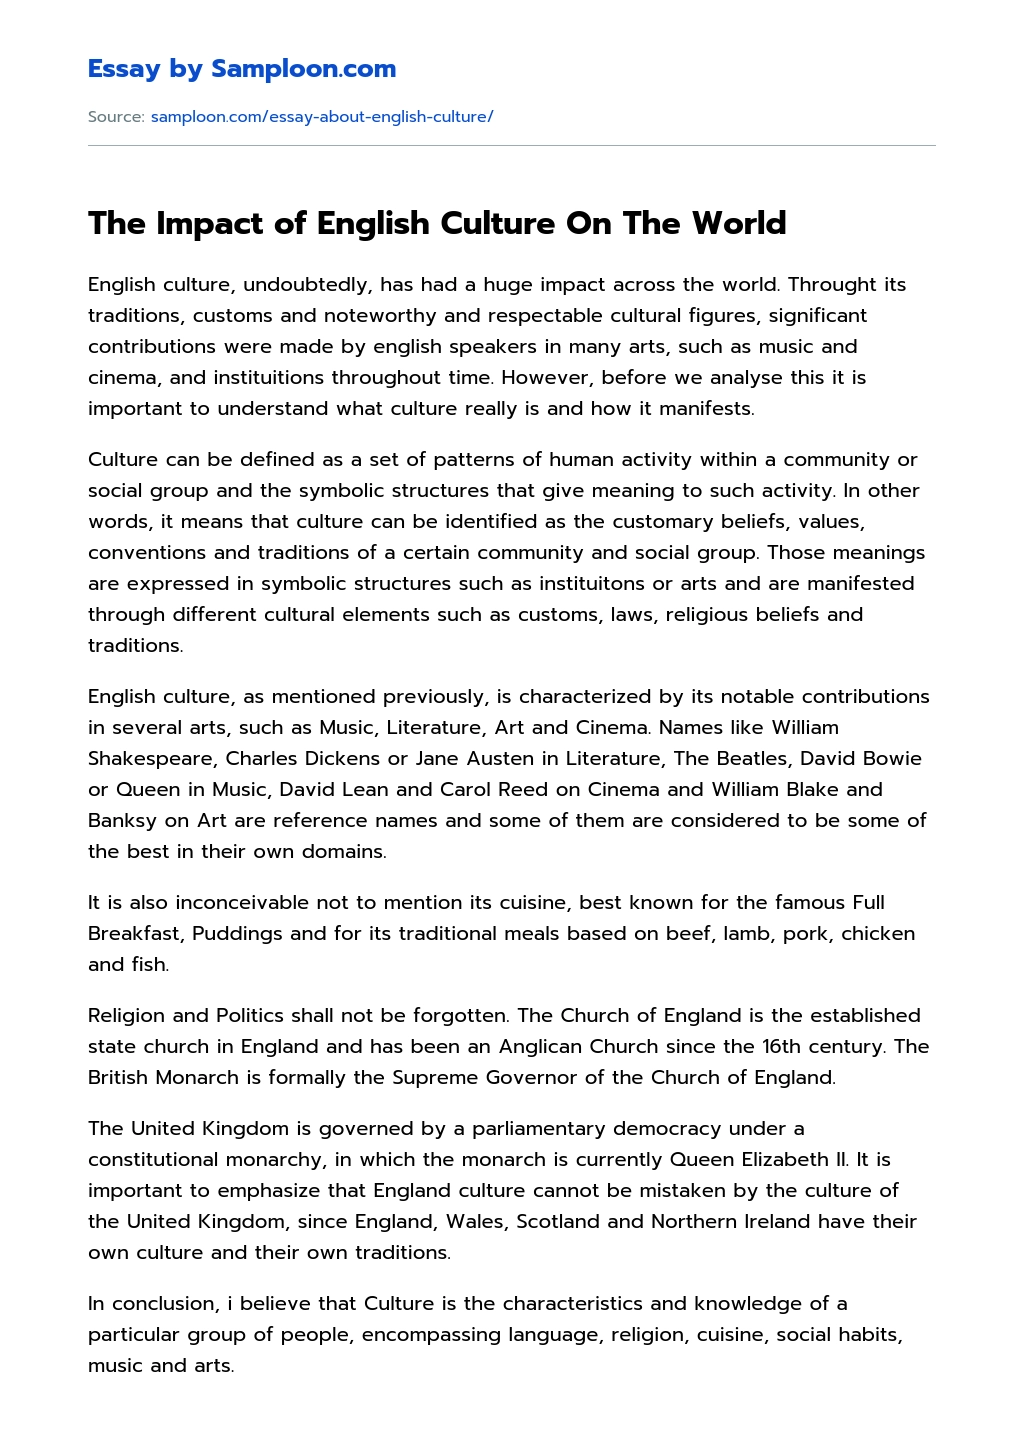 The Impact of English Culture On The World essay